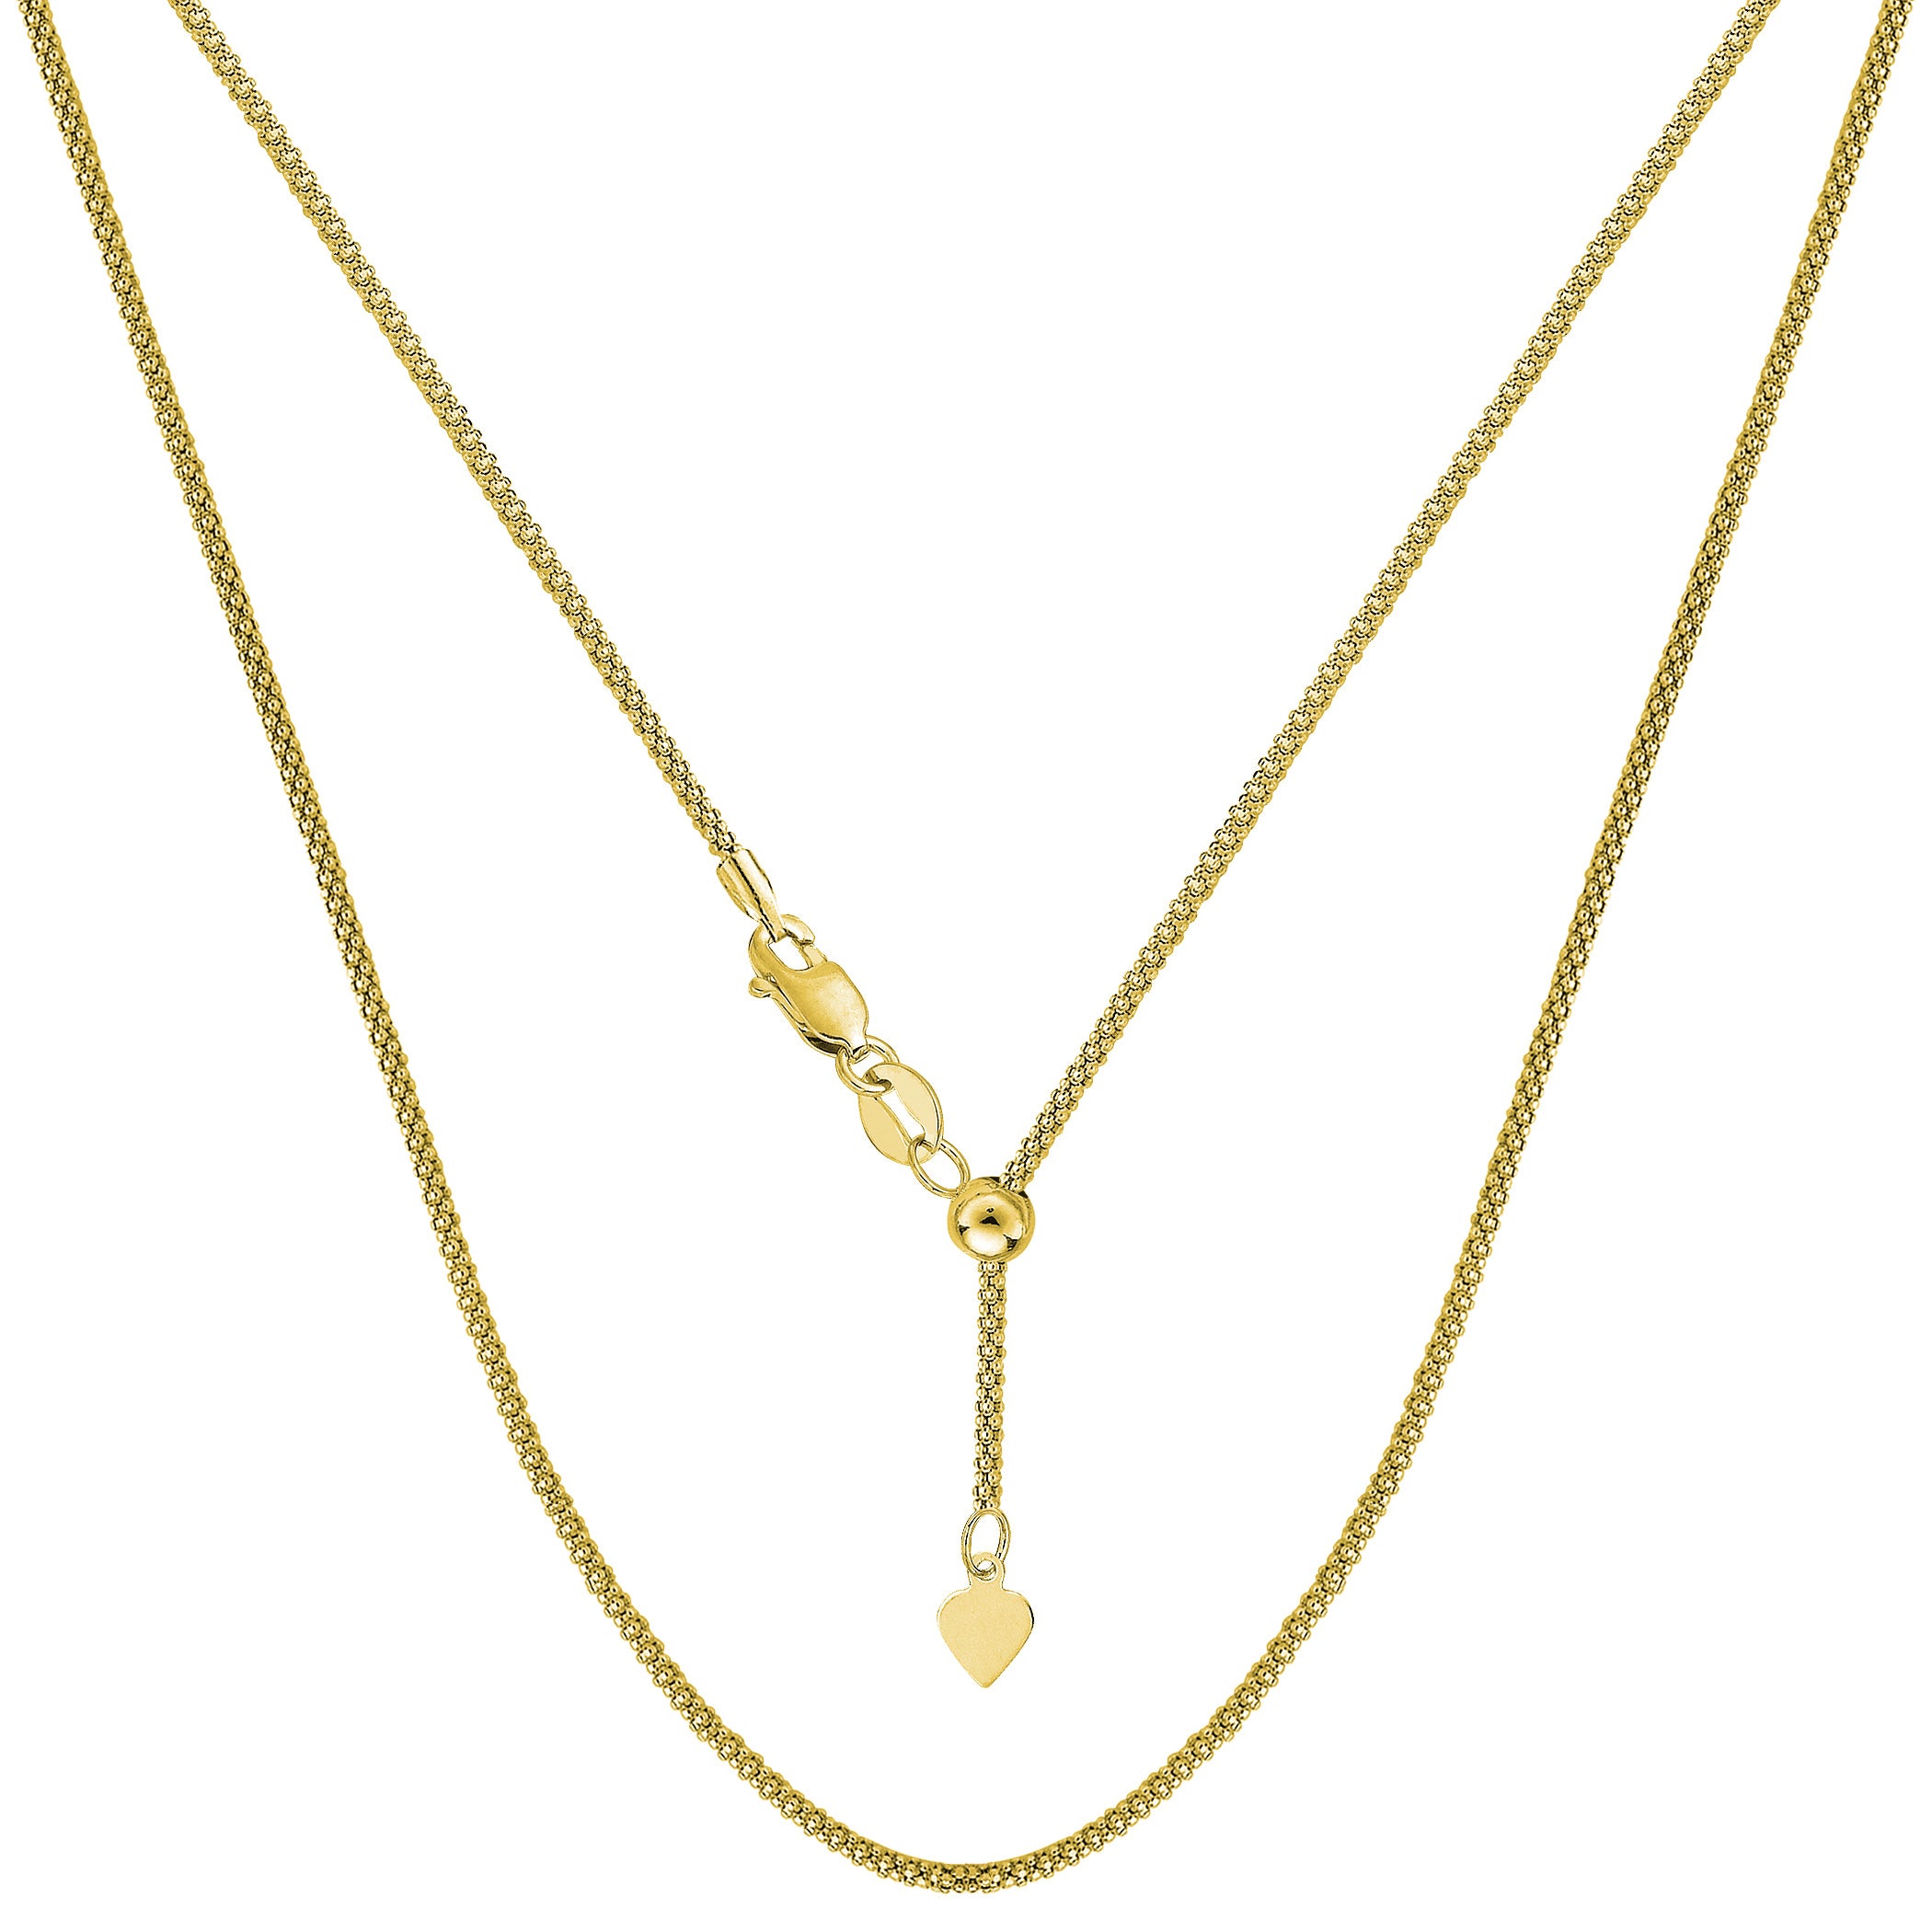 14k Yellow Gold Adjustable Popcorn Link Chain Necklace, 1.3mm, 22"